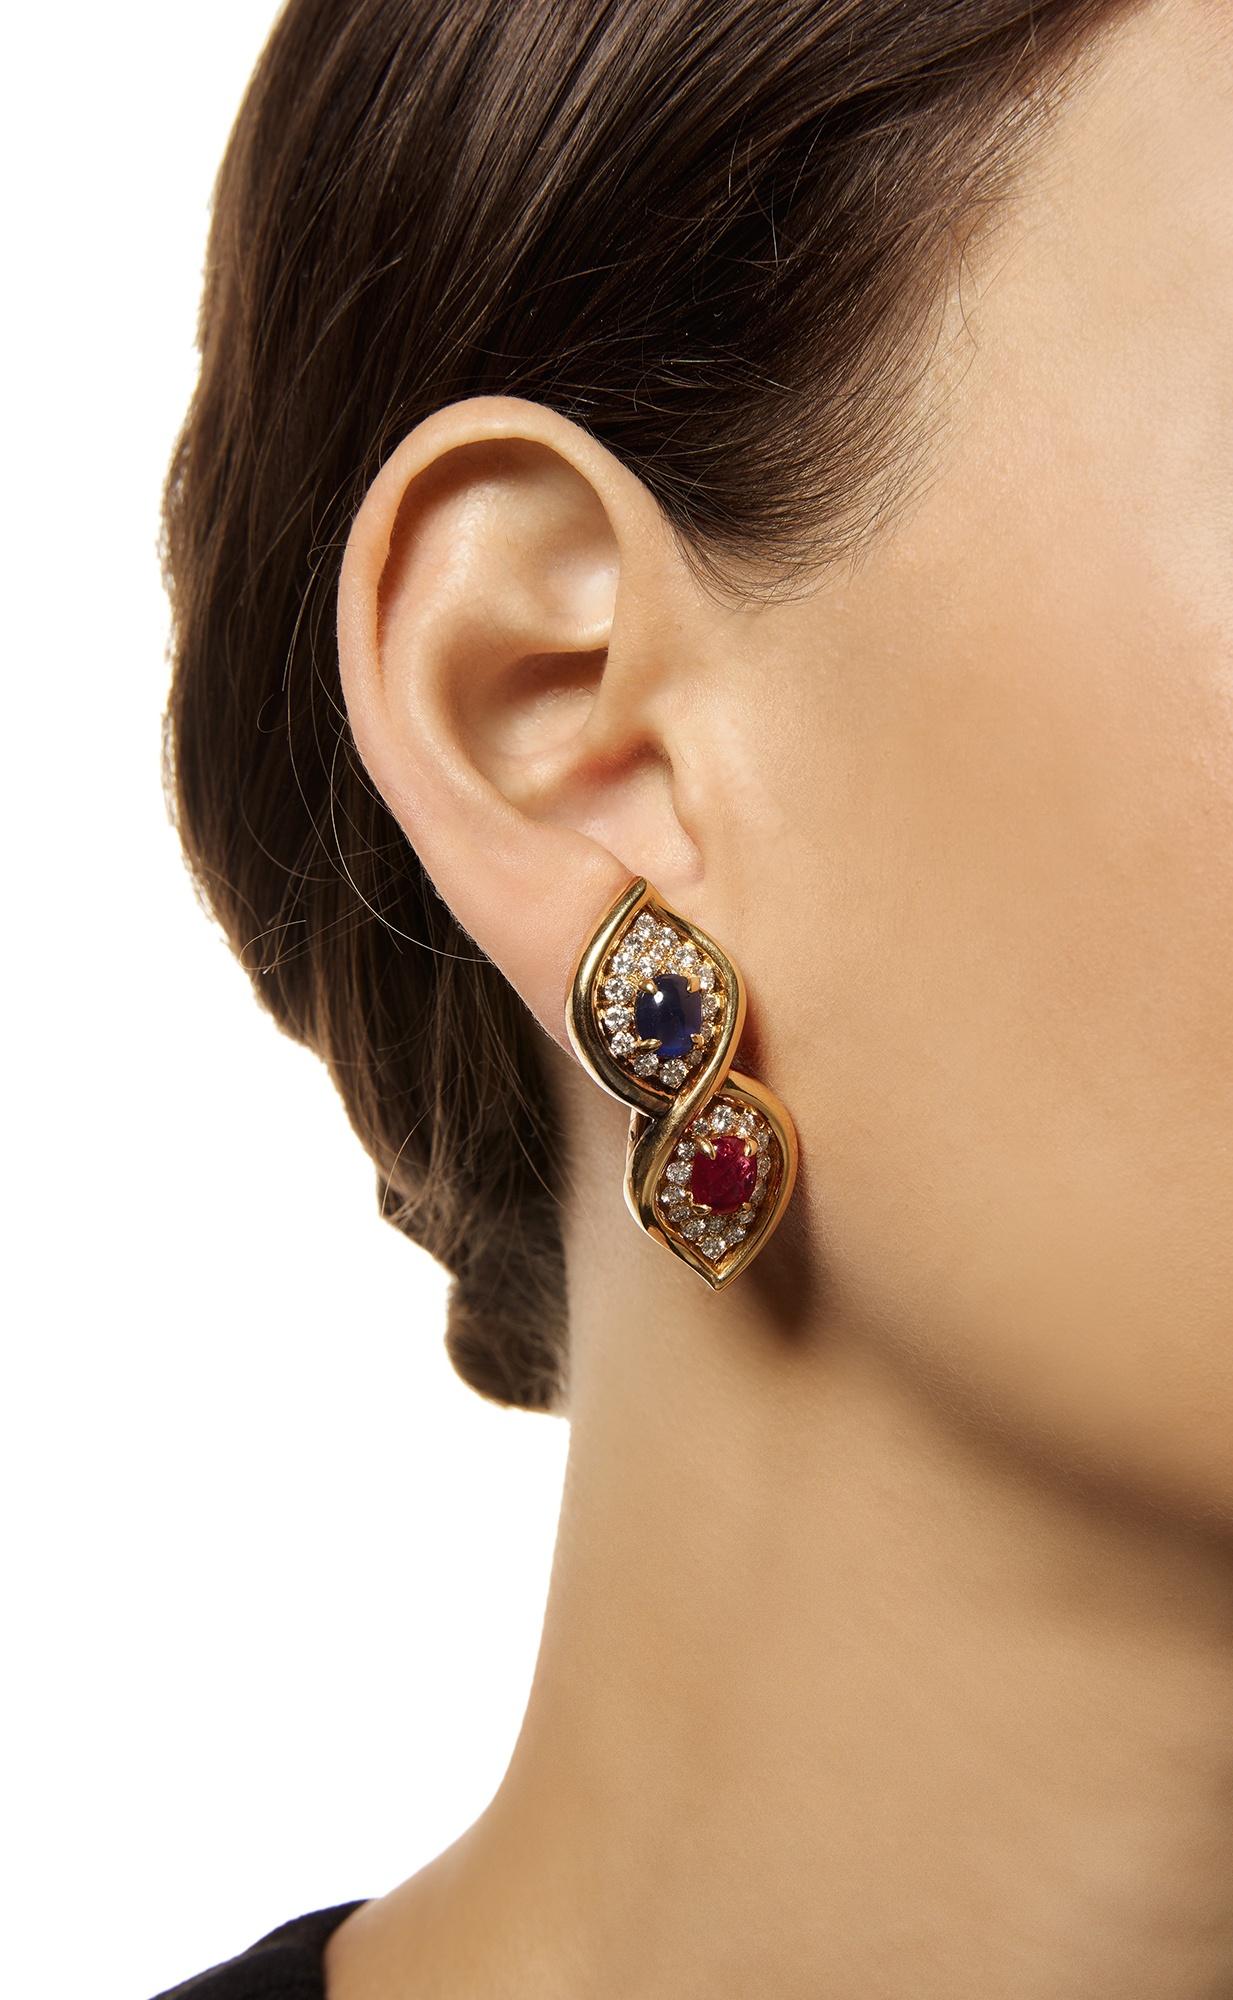 A Pair of Ruby, Sapphire and Diamond Earclips by Bulgari. Made in Italy, circa 1970.
Set with cabochon rubies and sapphires, encircled by pavé-set round diamonds, within polished gold figure eight frames.